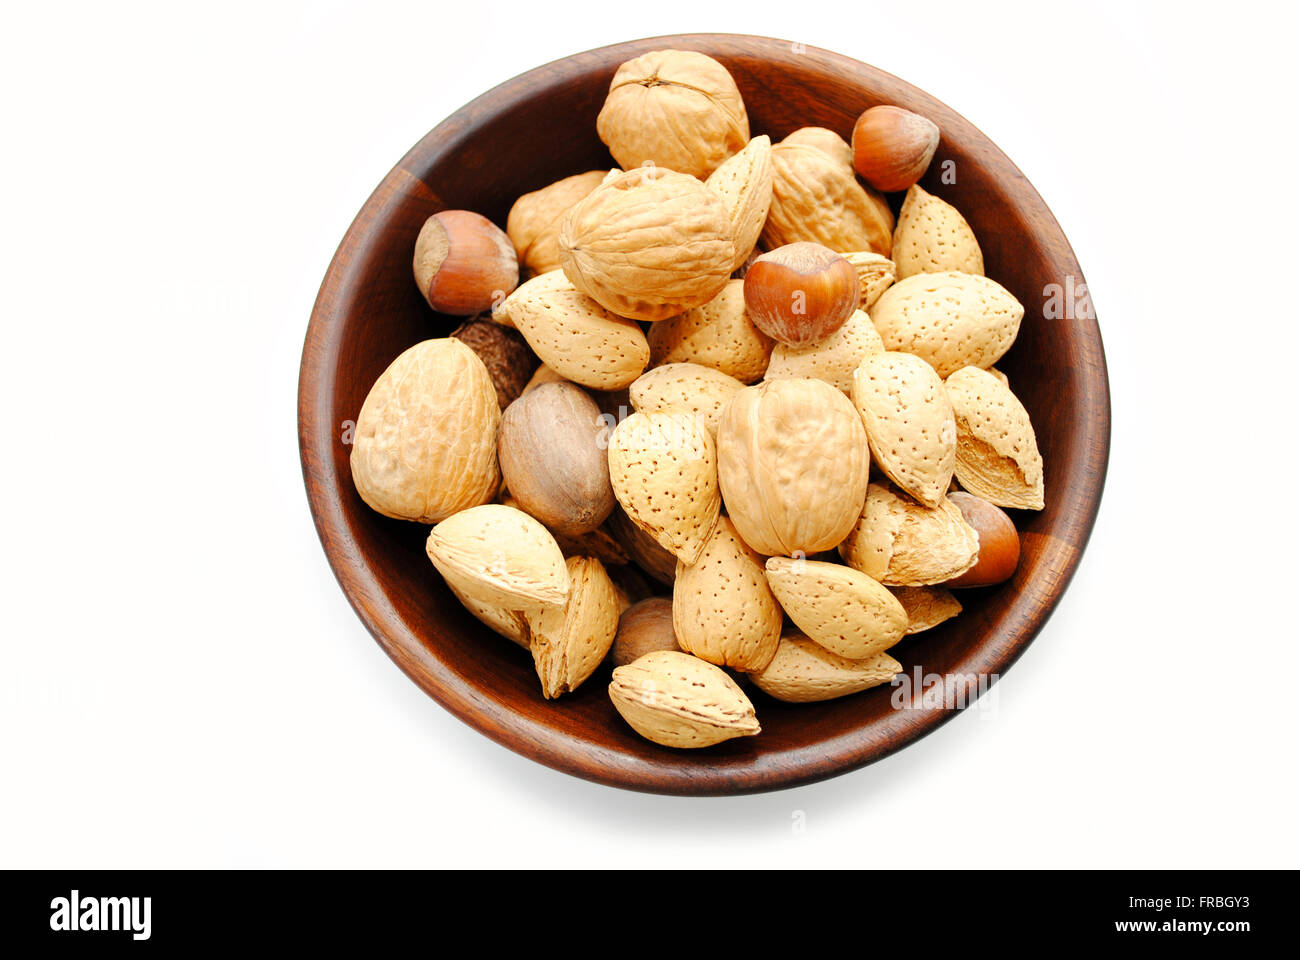 Wooden Bowl Filled with Whole Mixed Nuts Stock Photo